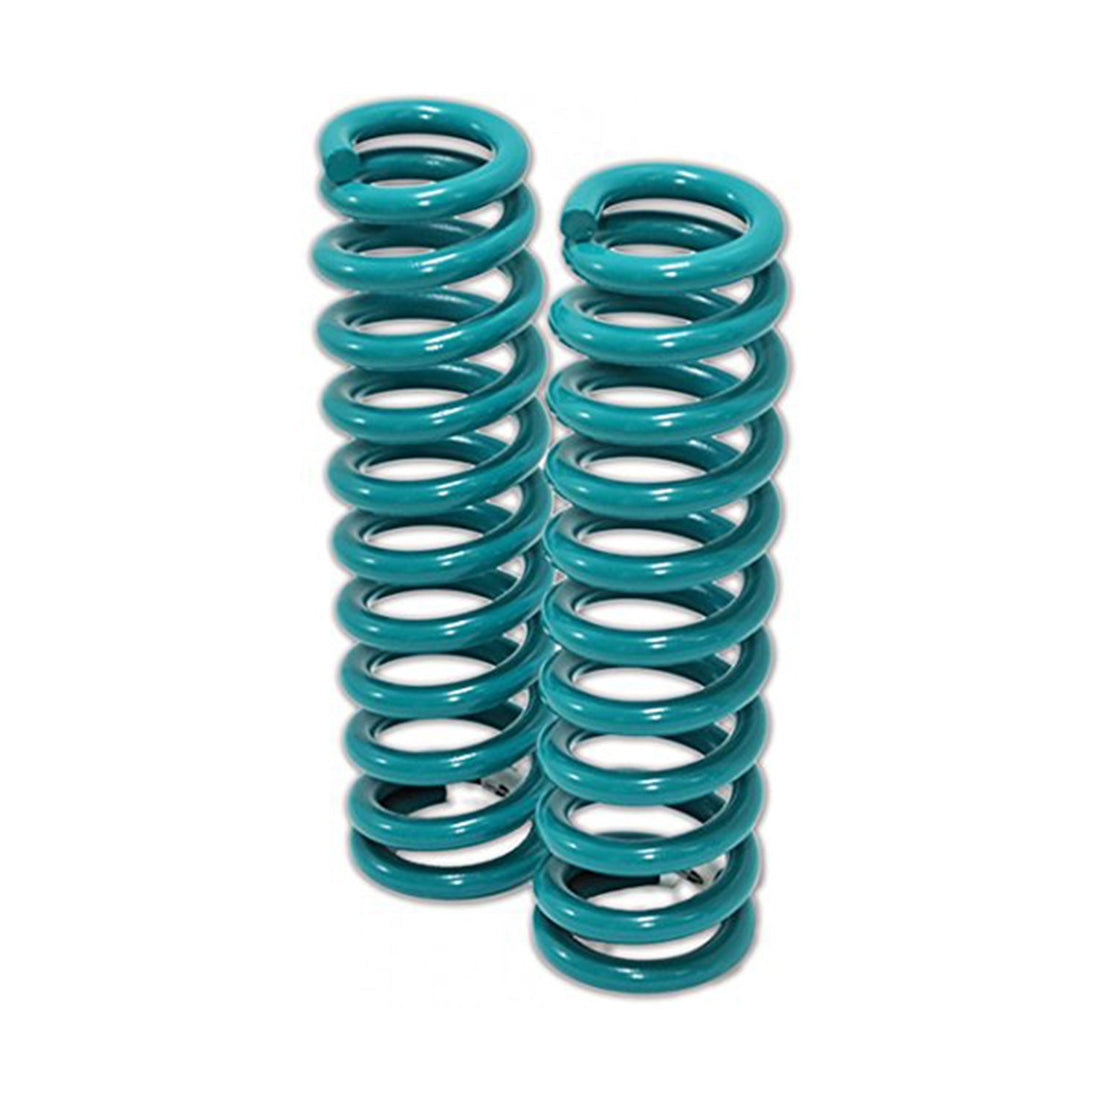 Dobinsons Rear Coil Springs for Land Rover vehicles  (C51-022)